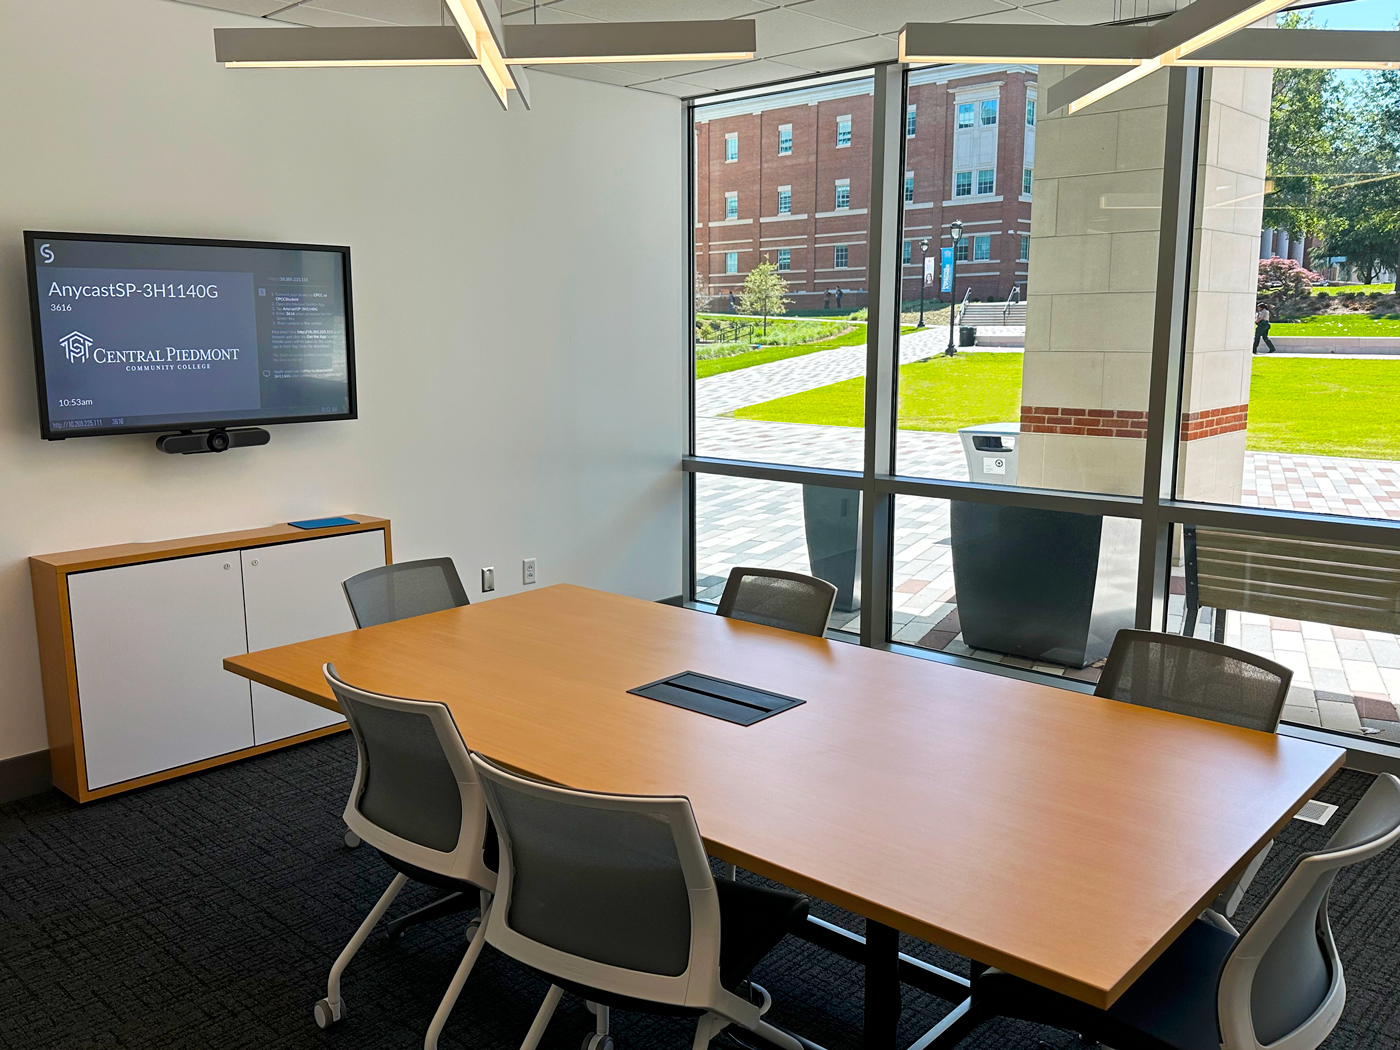 Conference rooms of various configurations and capacities are available on all three interior levels of the Parr Center. The conference rooms rely on HC 404 collaboration systems and IN1604 scalers for AV connectivity. Some of the conference rooms include CCR 30 control panels for selecting wireless sharing with the push of a button.